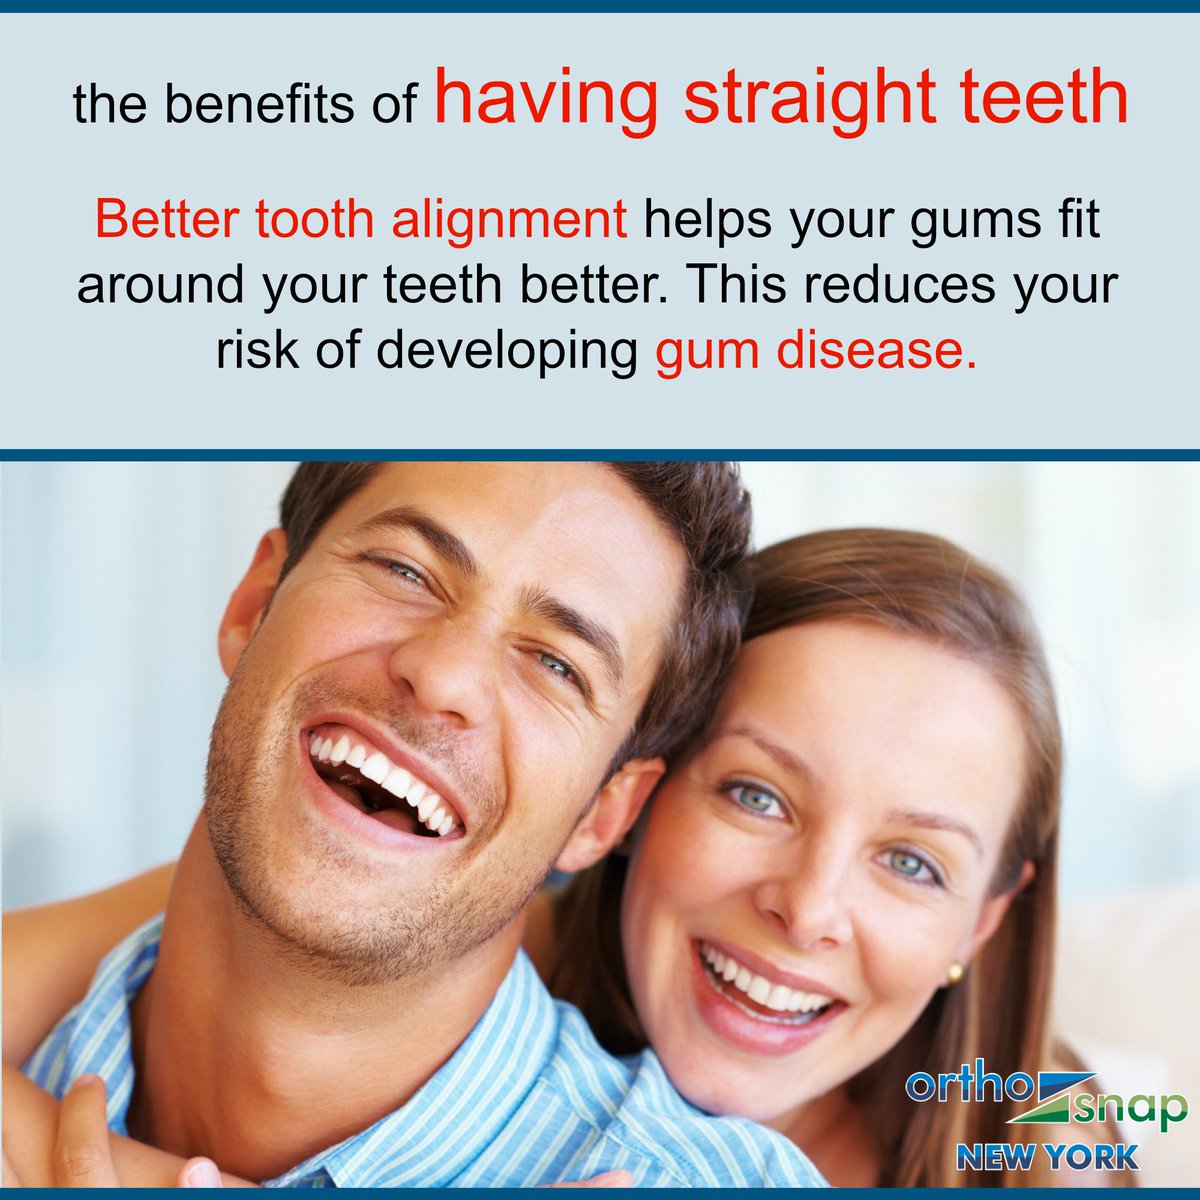 #Straighten your #teeth and keep them #healthy | #OrthoSnap - #clear #bracesalternative | orthosnapny.com |